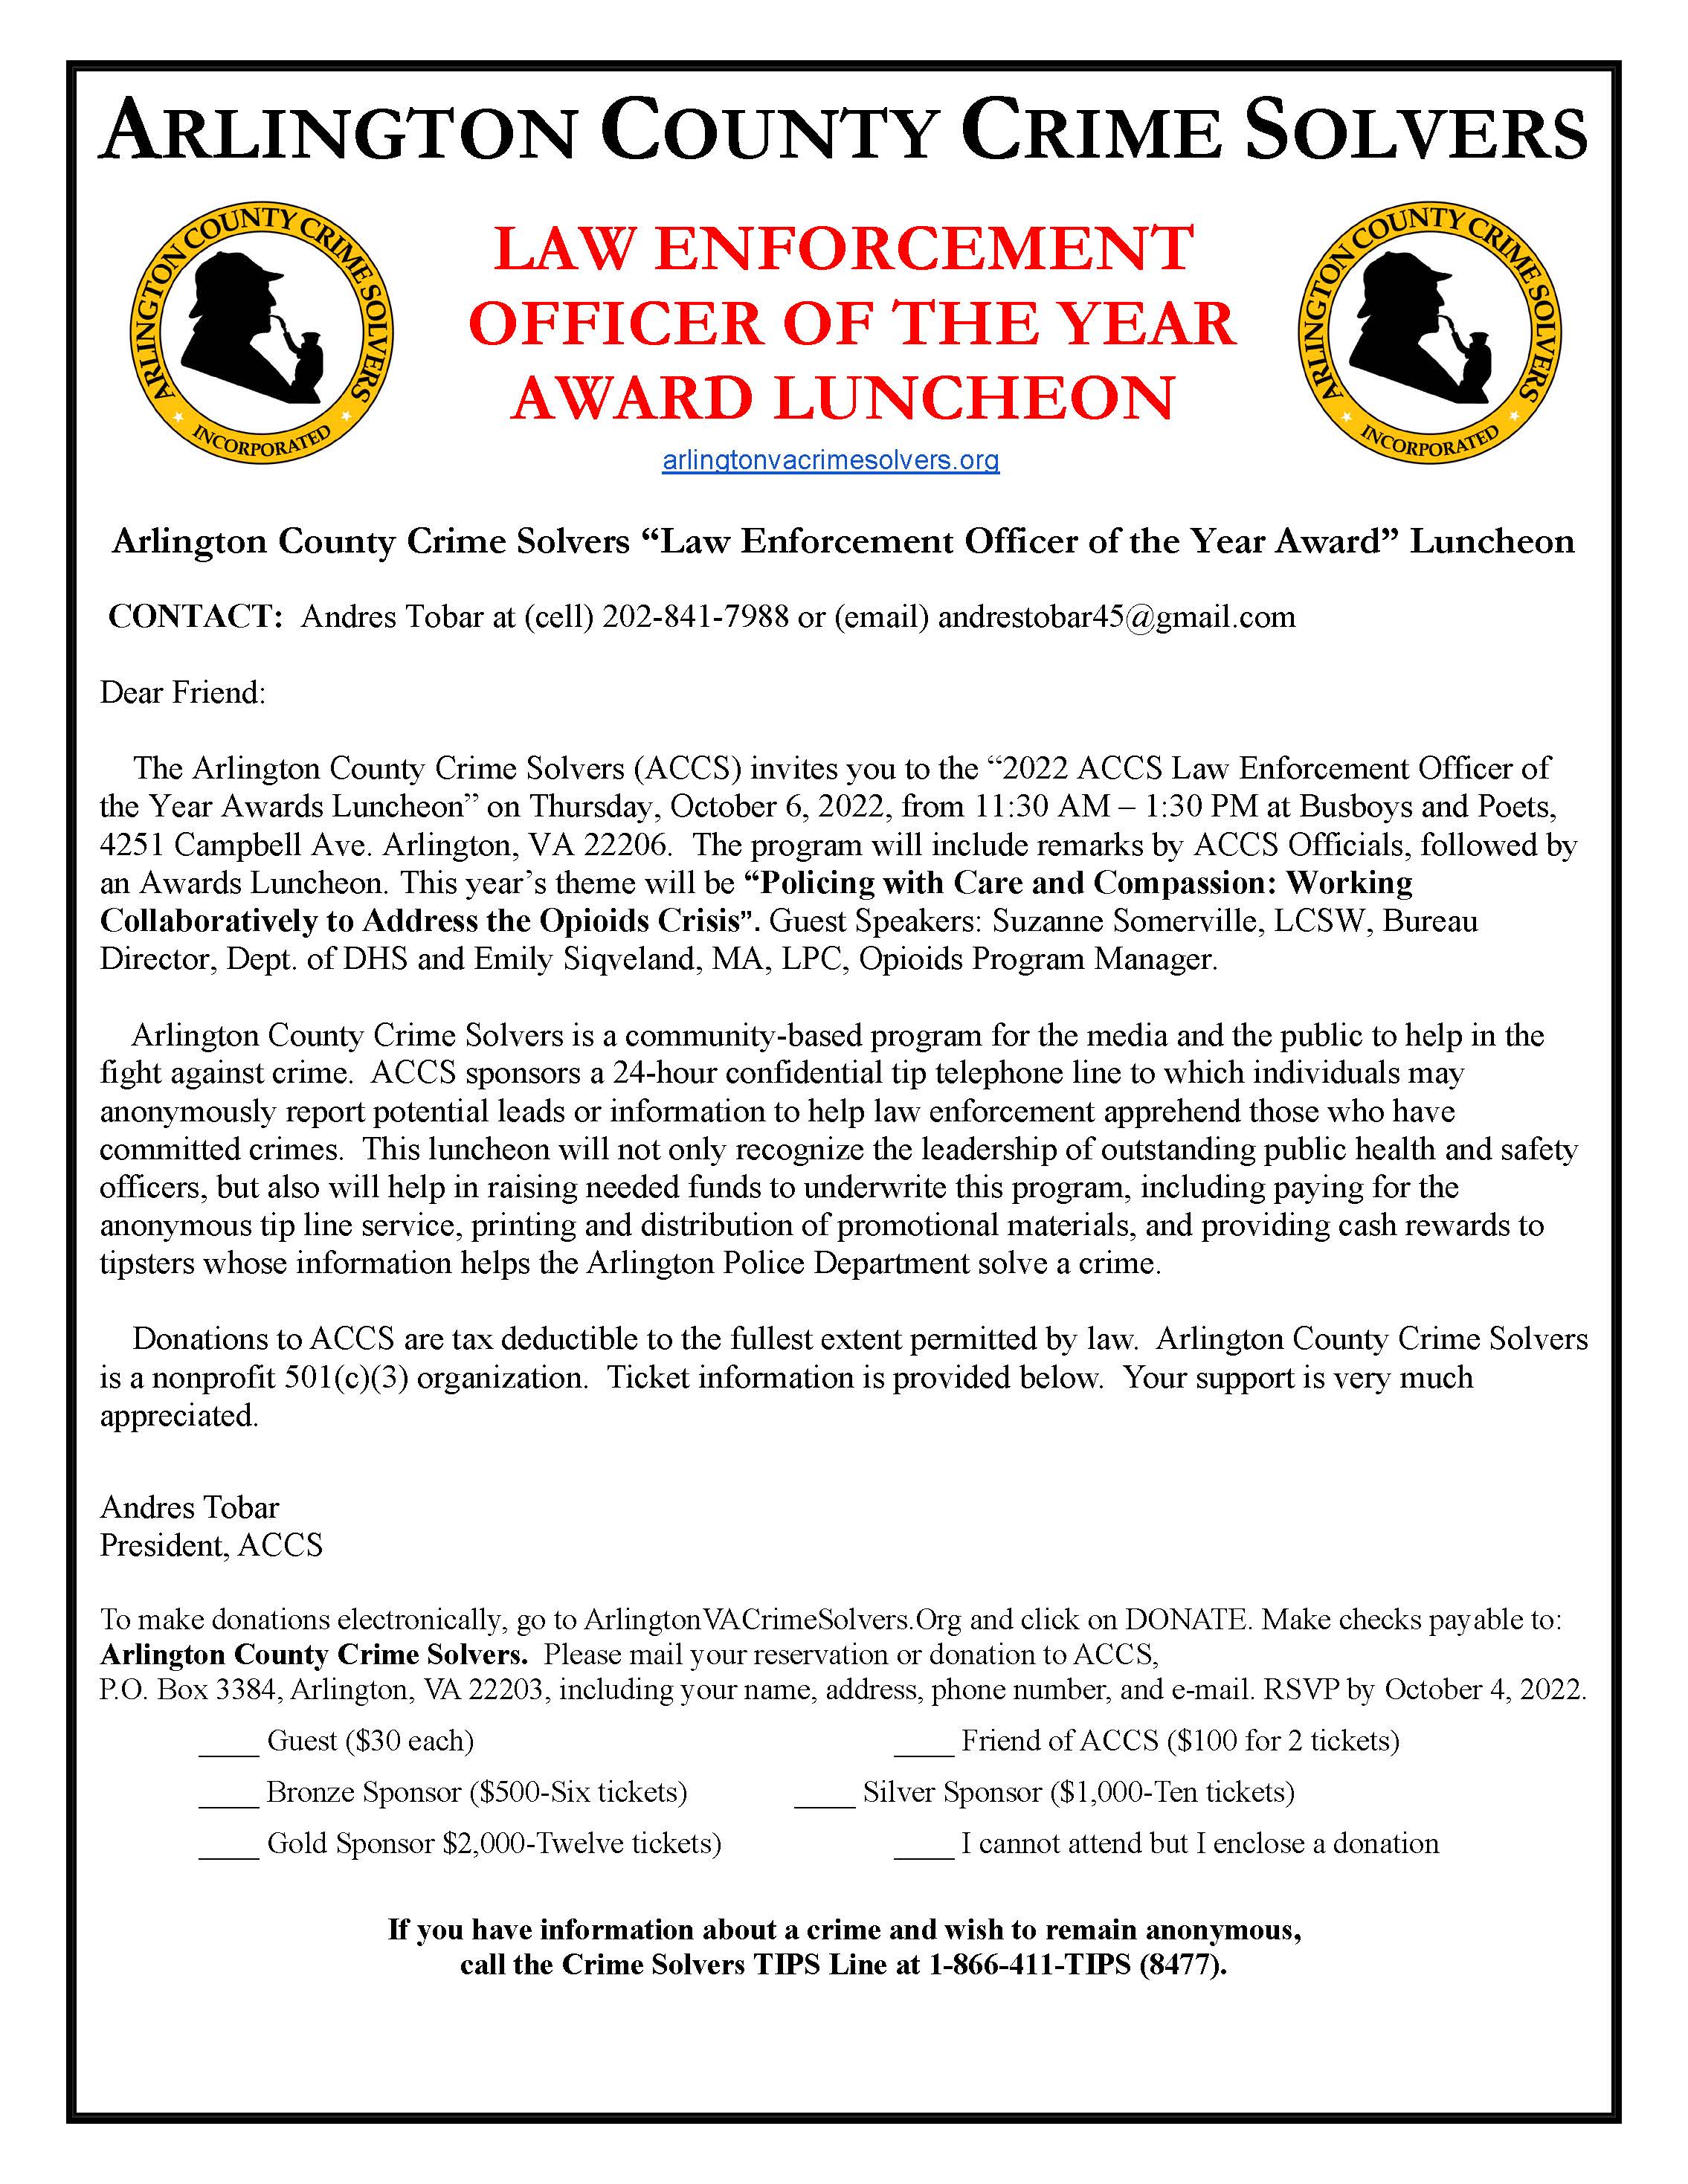 Law Enforcement Officer of the Year Award Luncheon - October 6, 2022